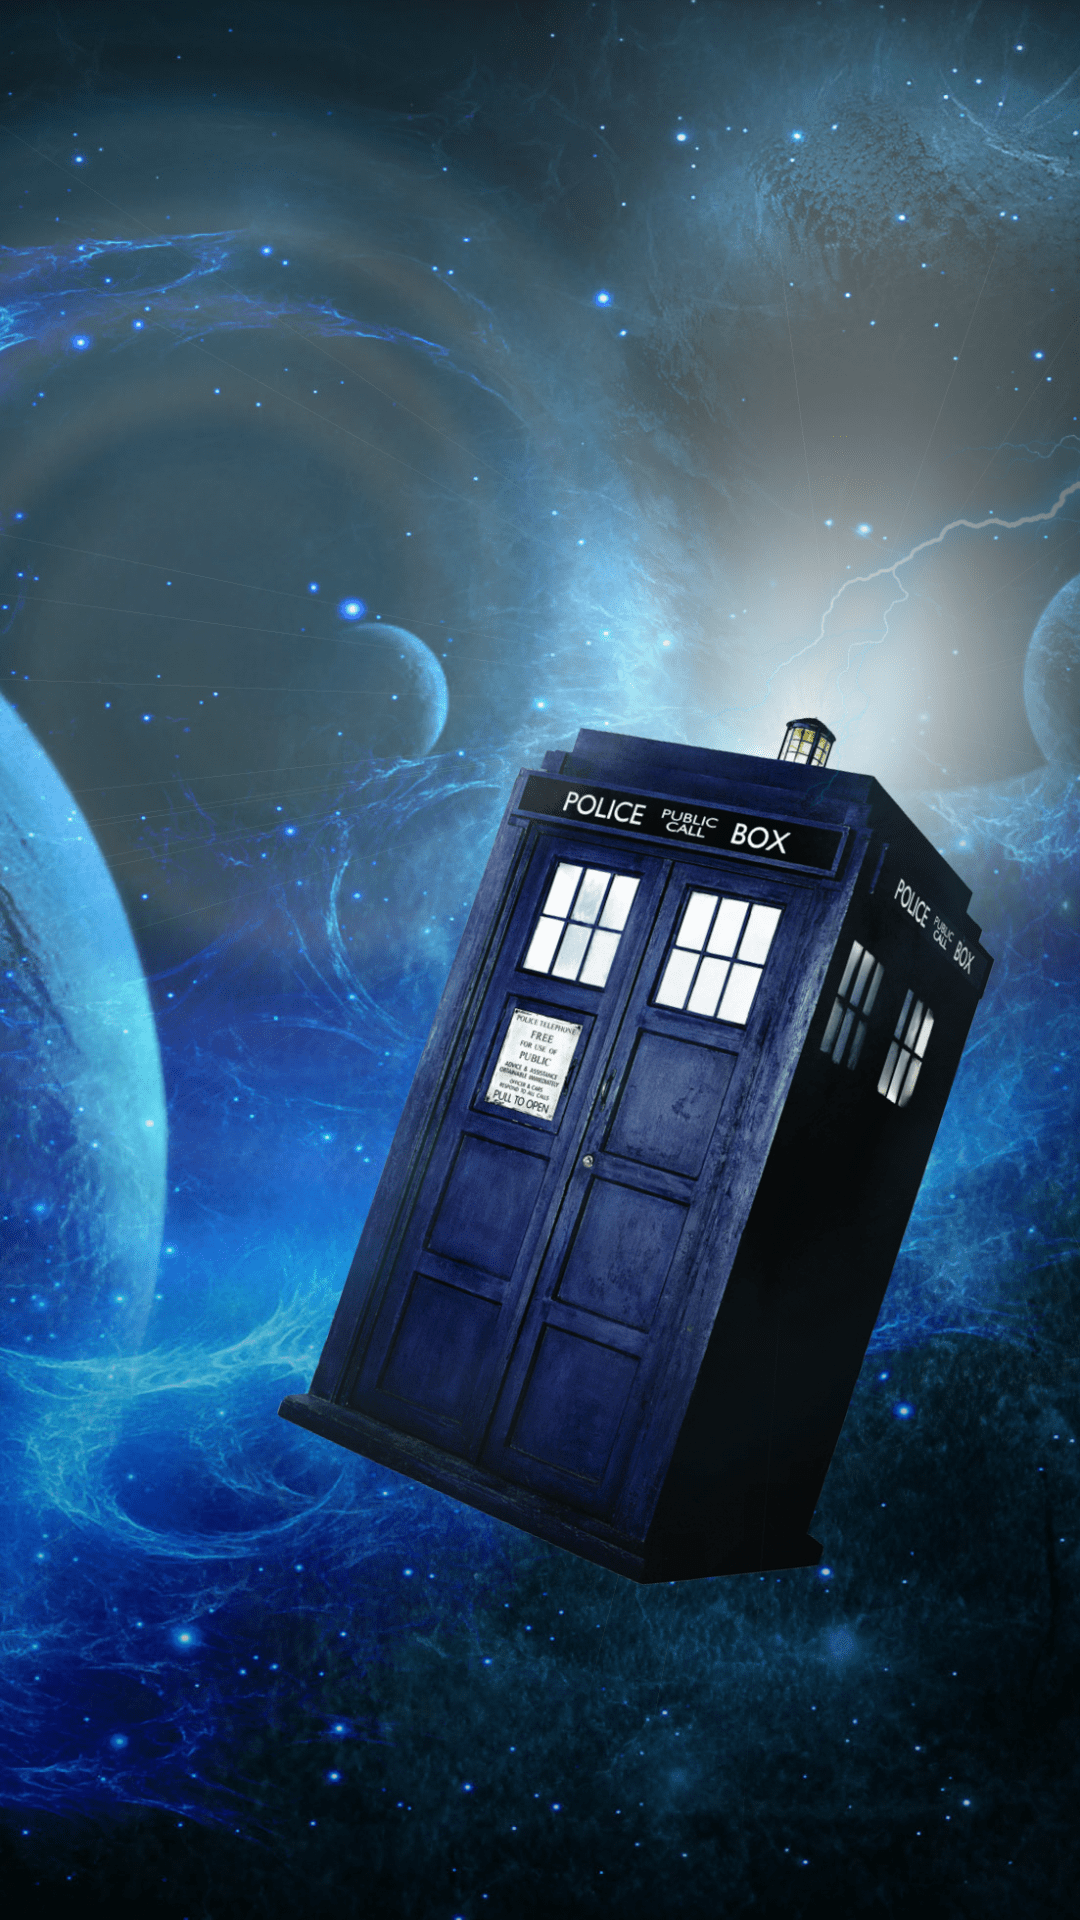 NEW Doctor Who Instagram smart phone wallpapers released  Blogtor Who